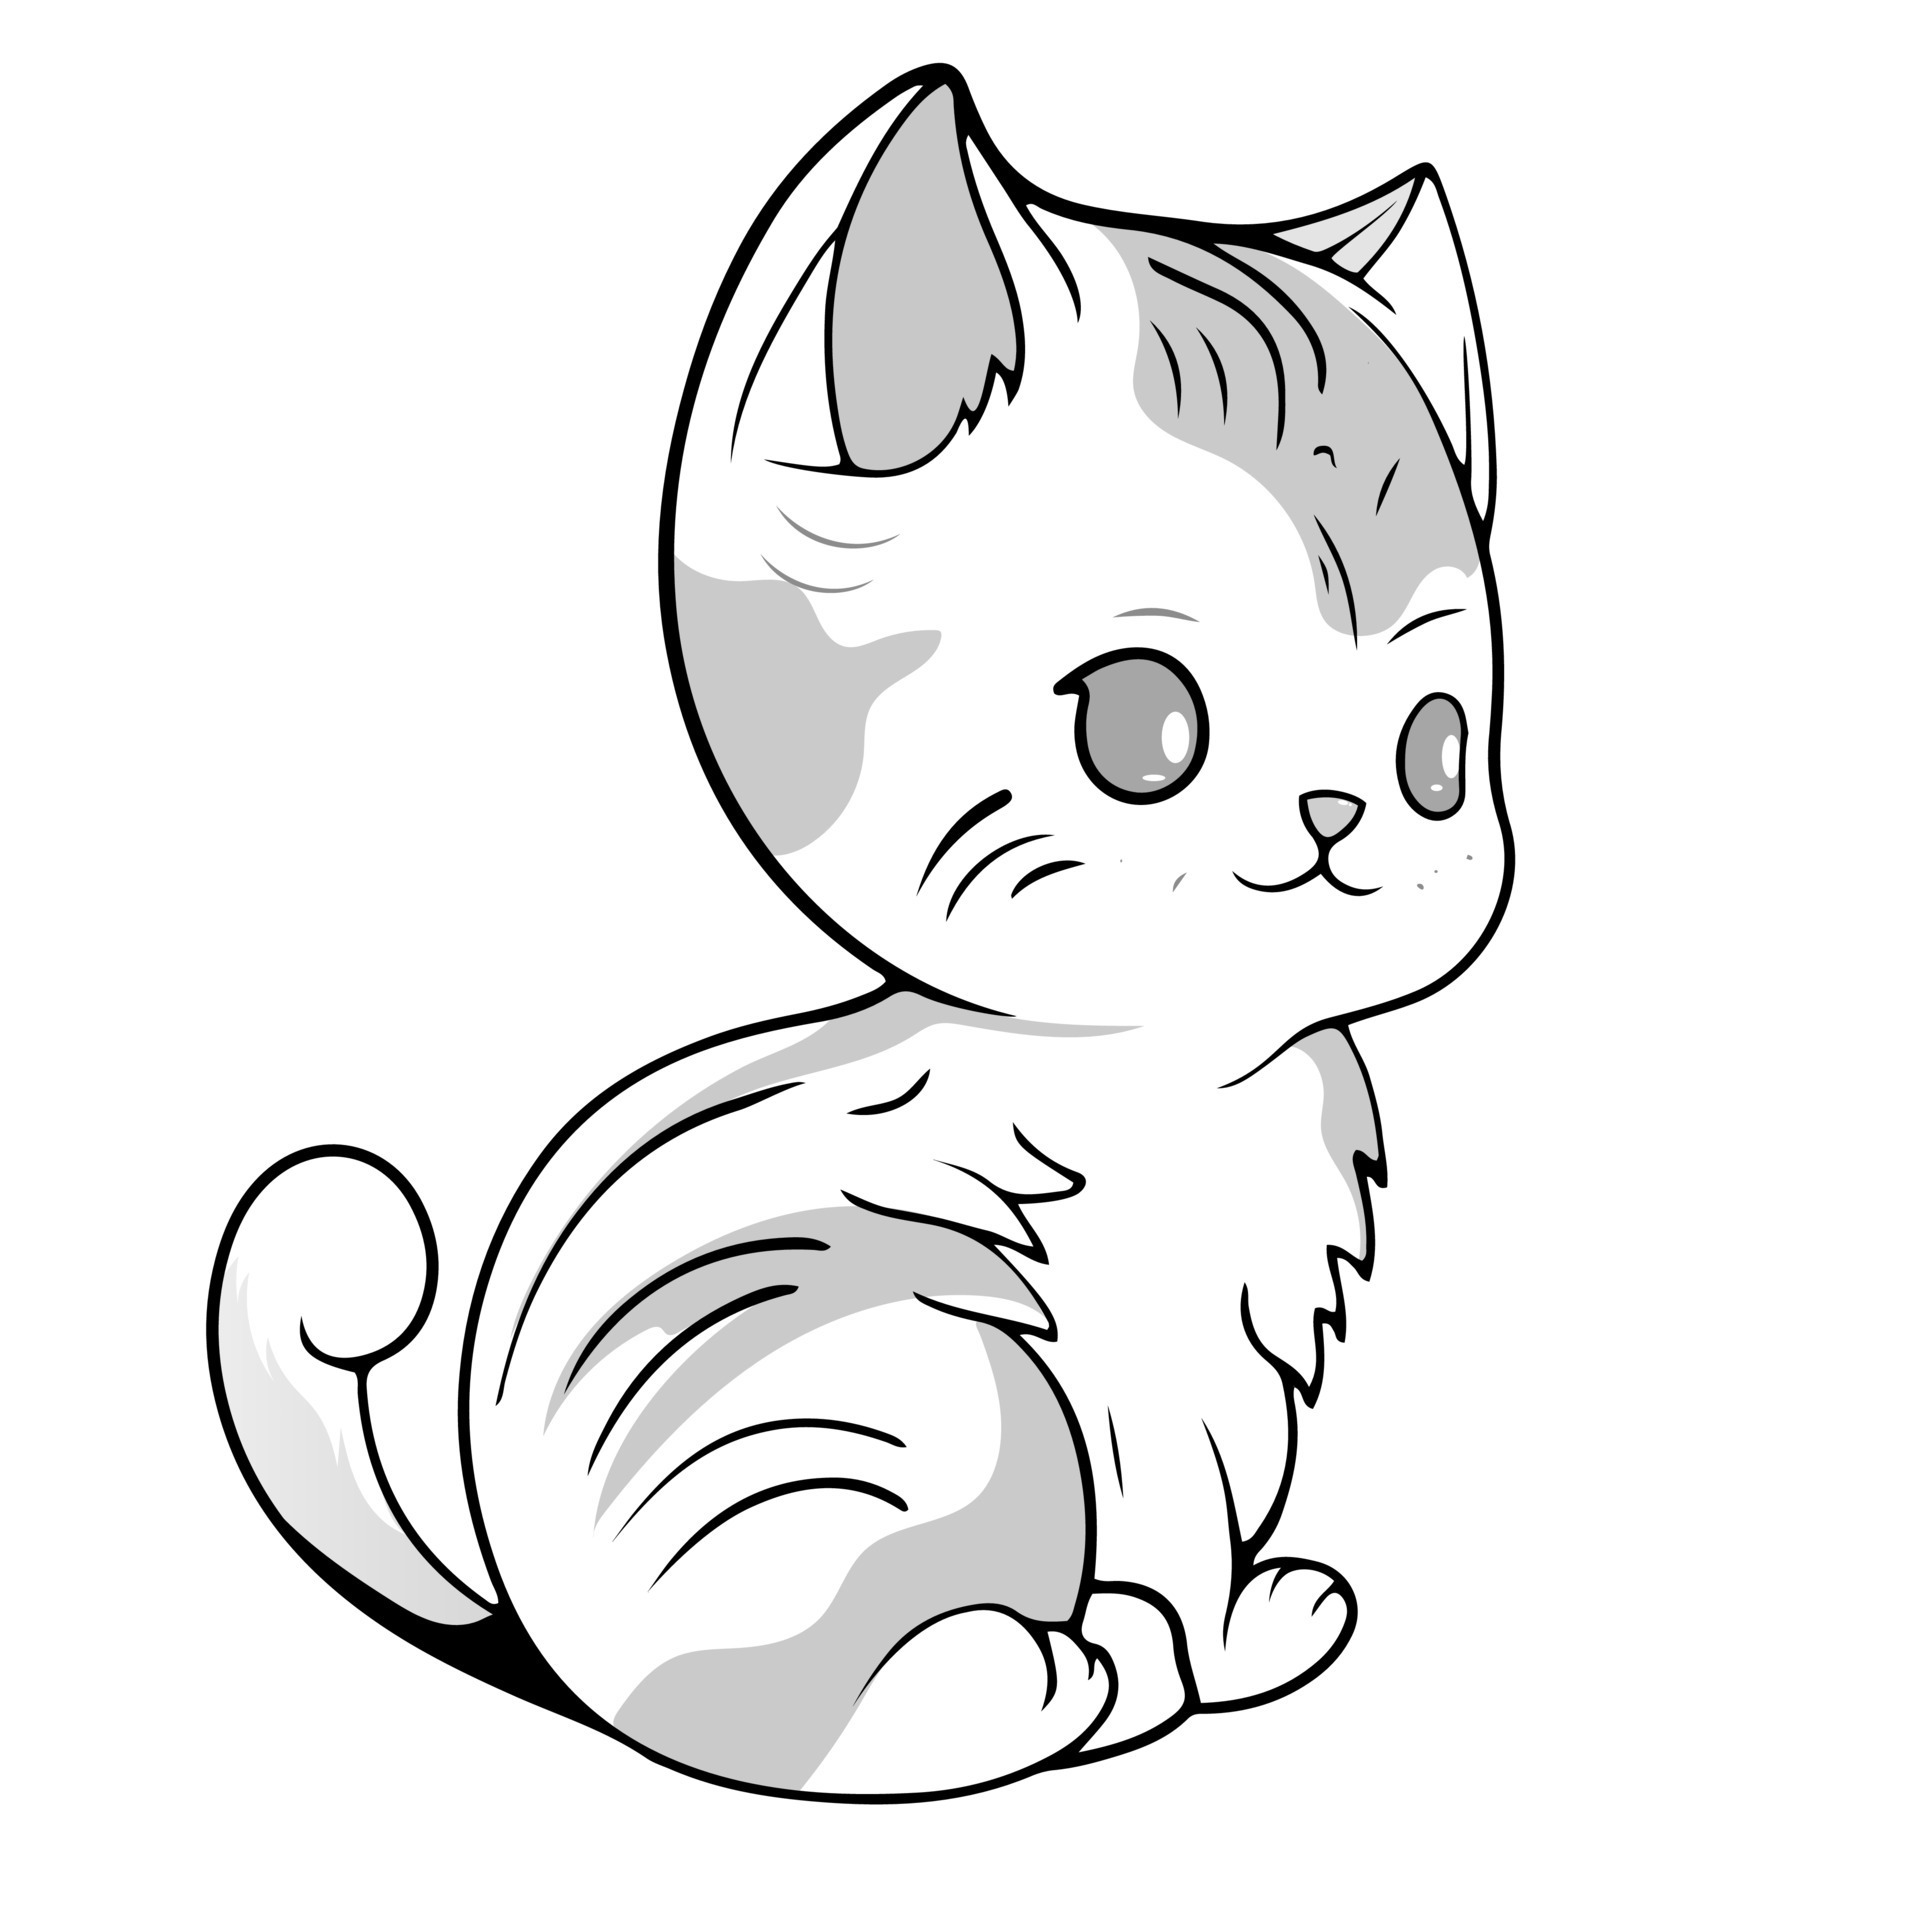 Cute Anime Cat Coloring Page For Kids  Turkau